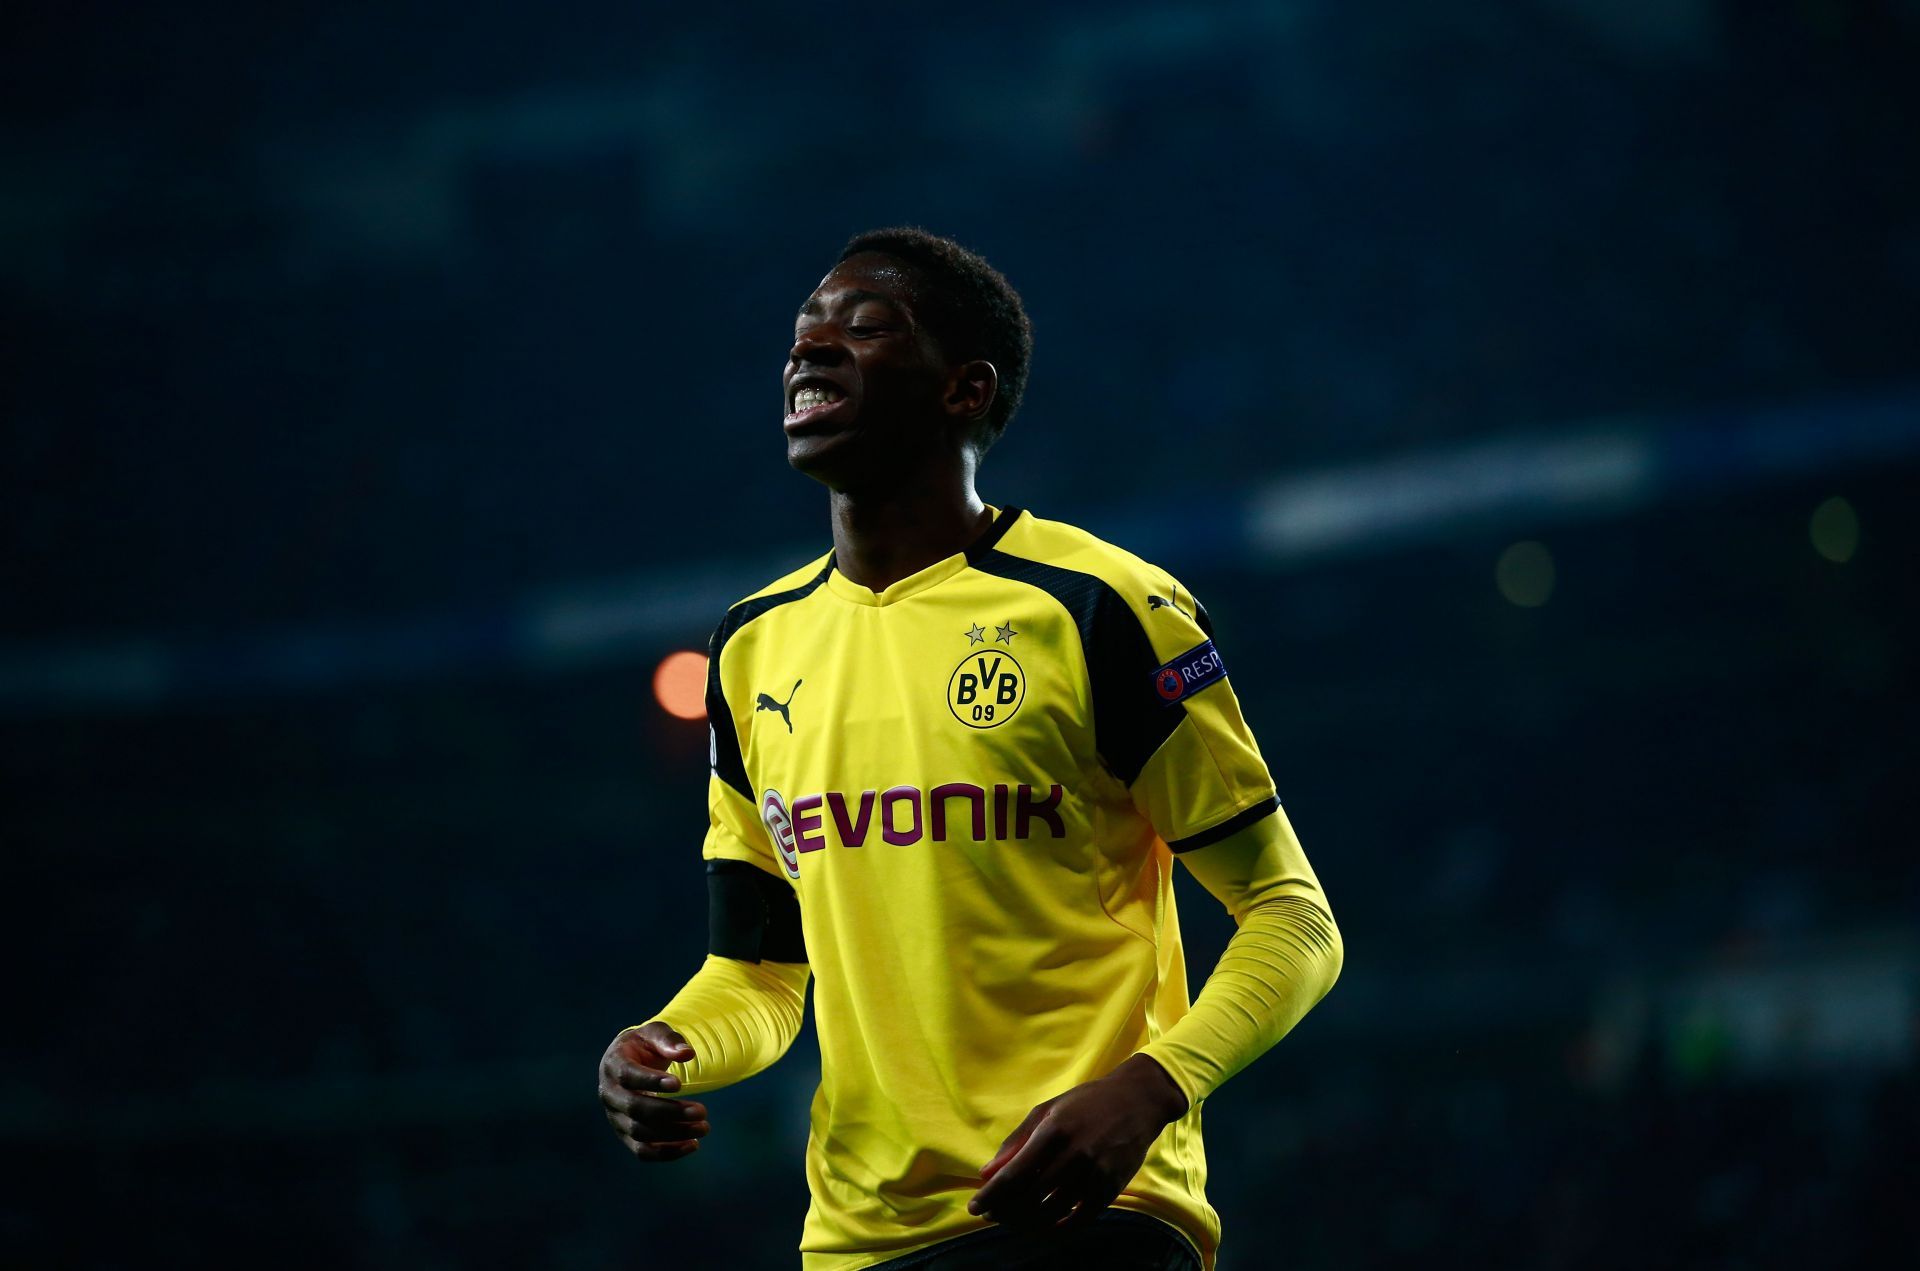 Ousmane Dembele will be joining a new club this winter